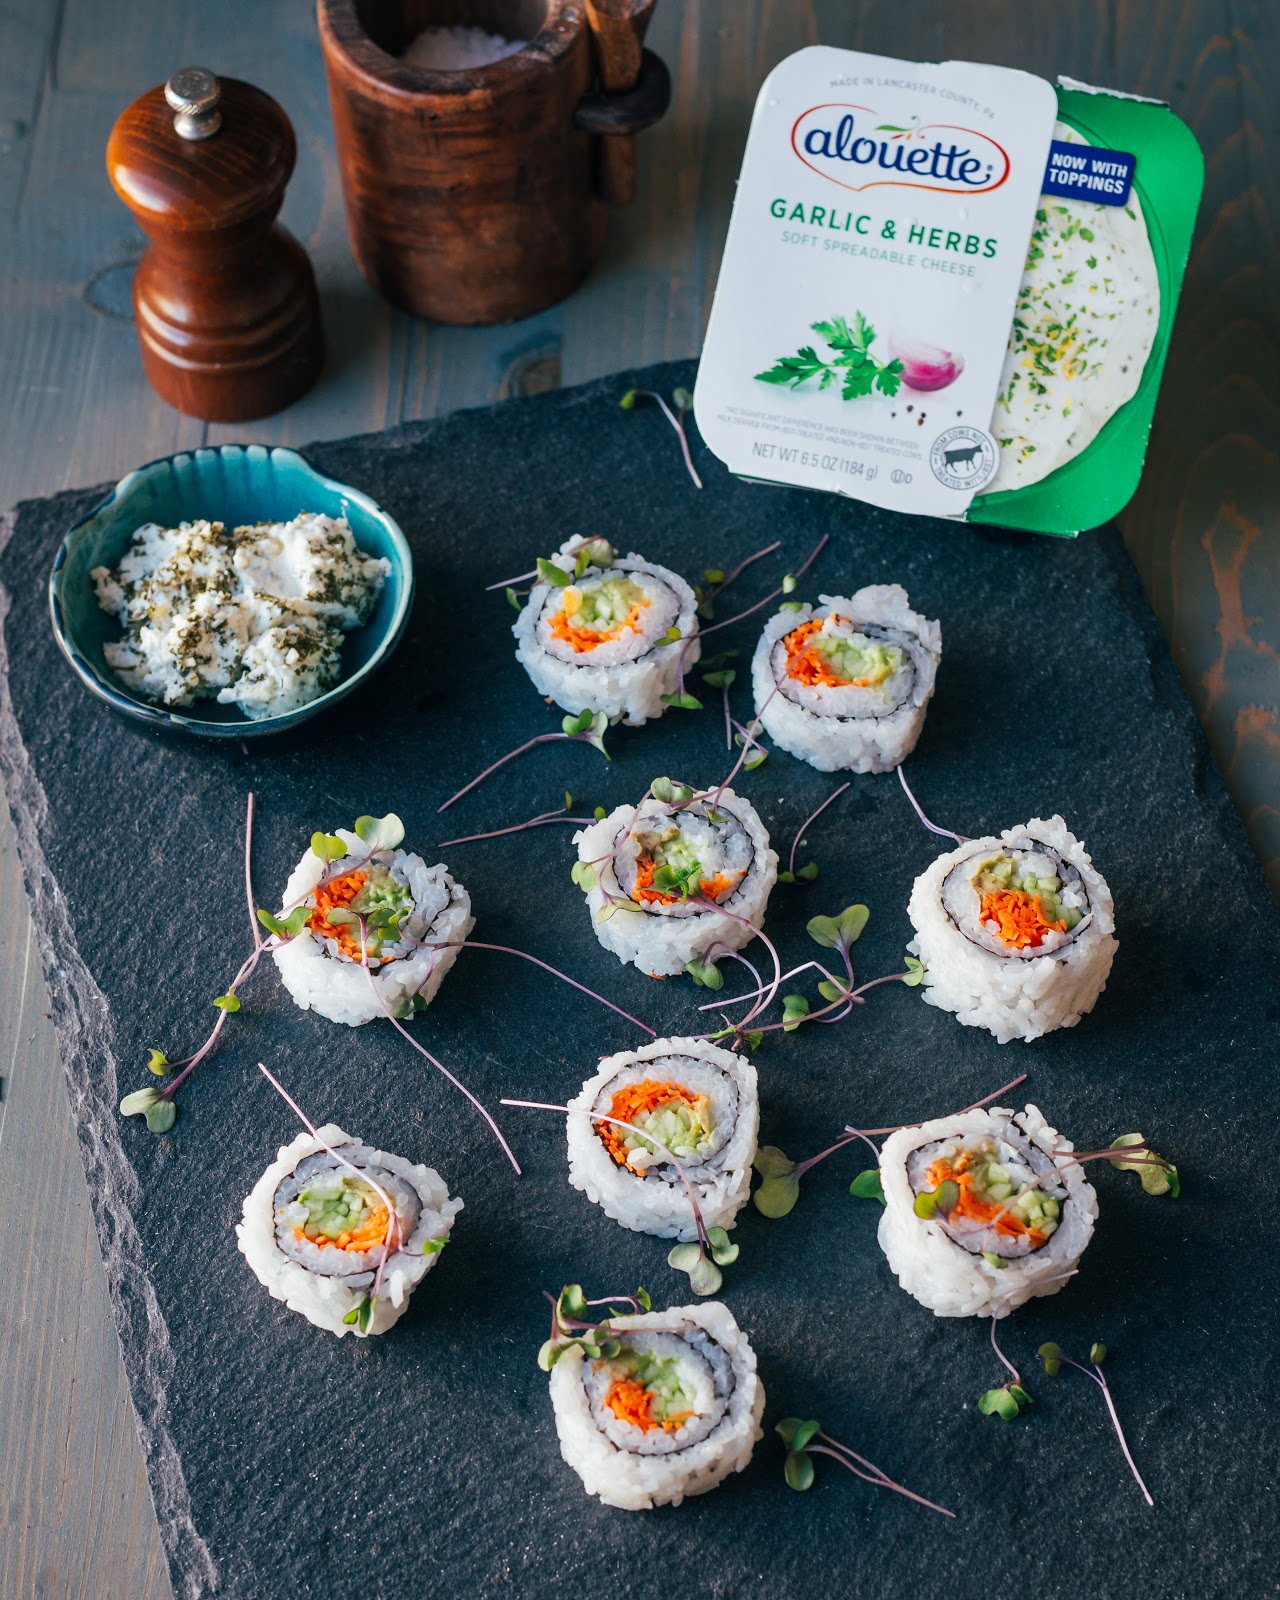 homemade sushi roll with Alouette garlic & herbs